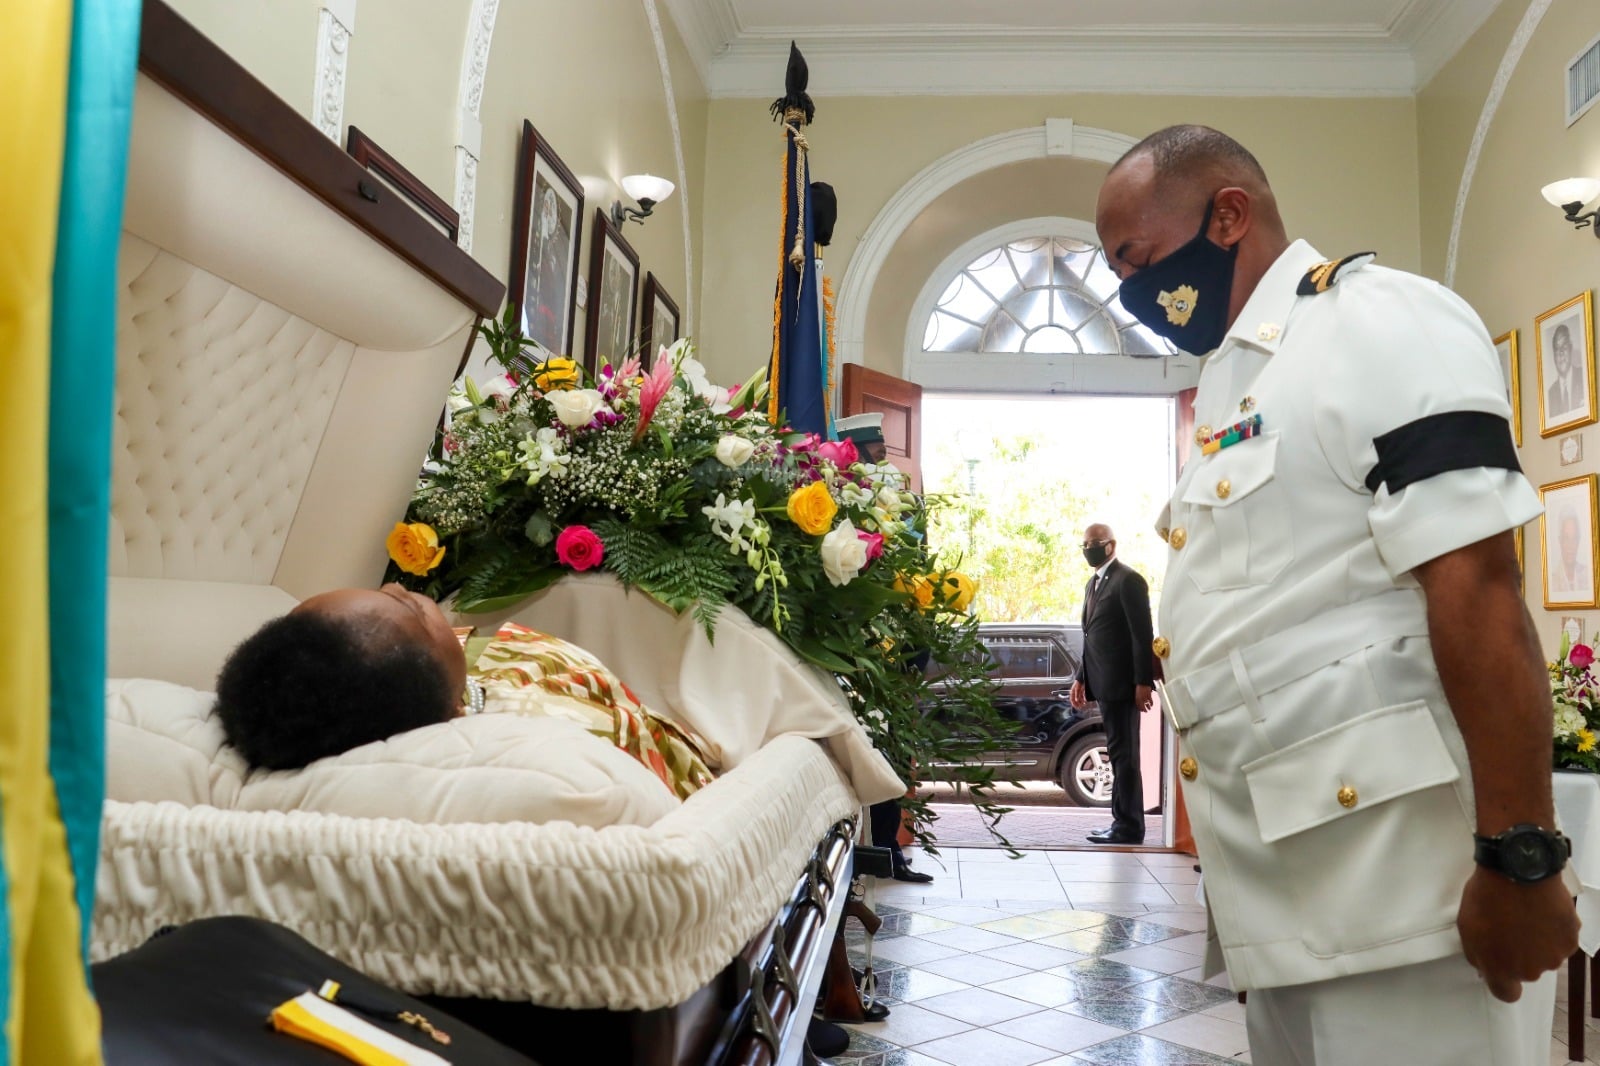 COMMANDER DEFENCE FORCE PAYS FINAL RESPECTS TO LATE SENATOR